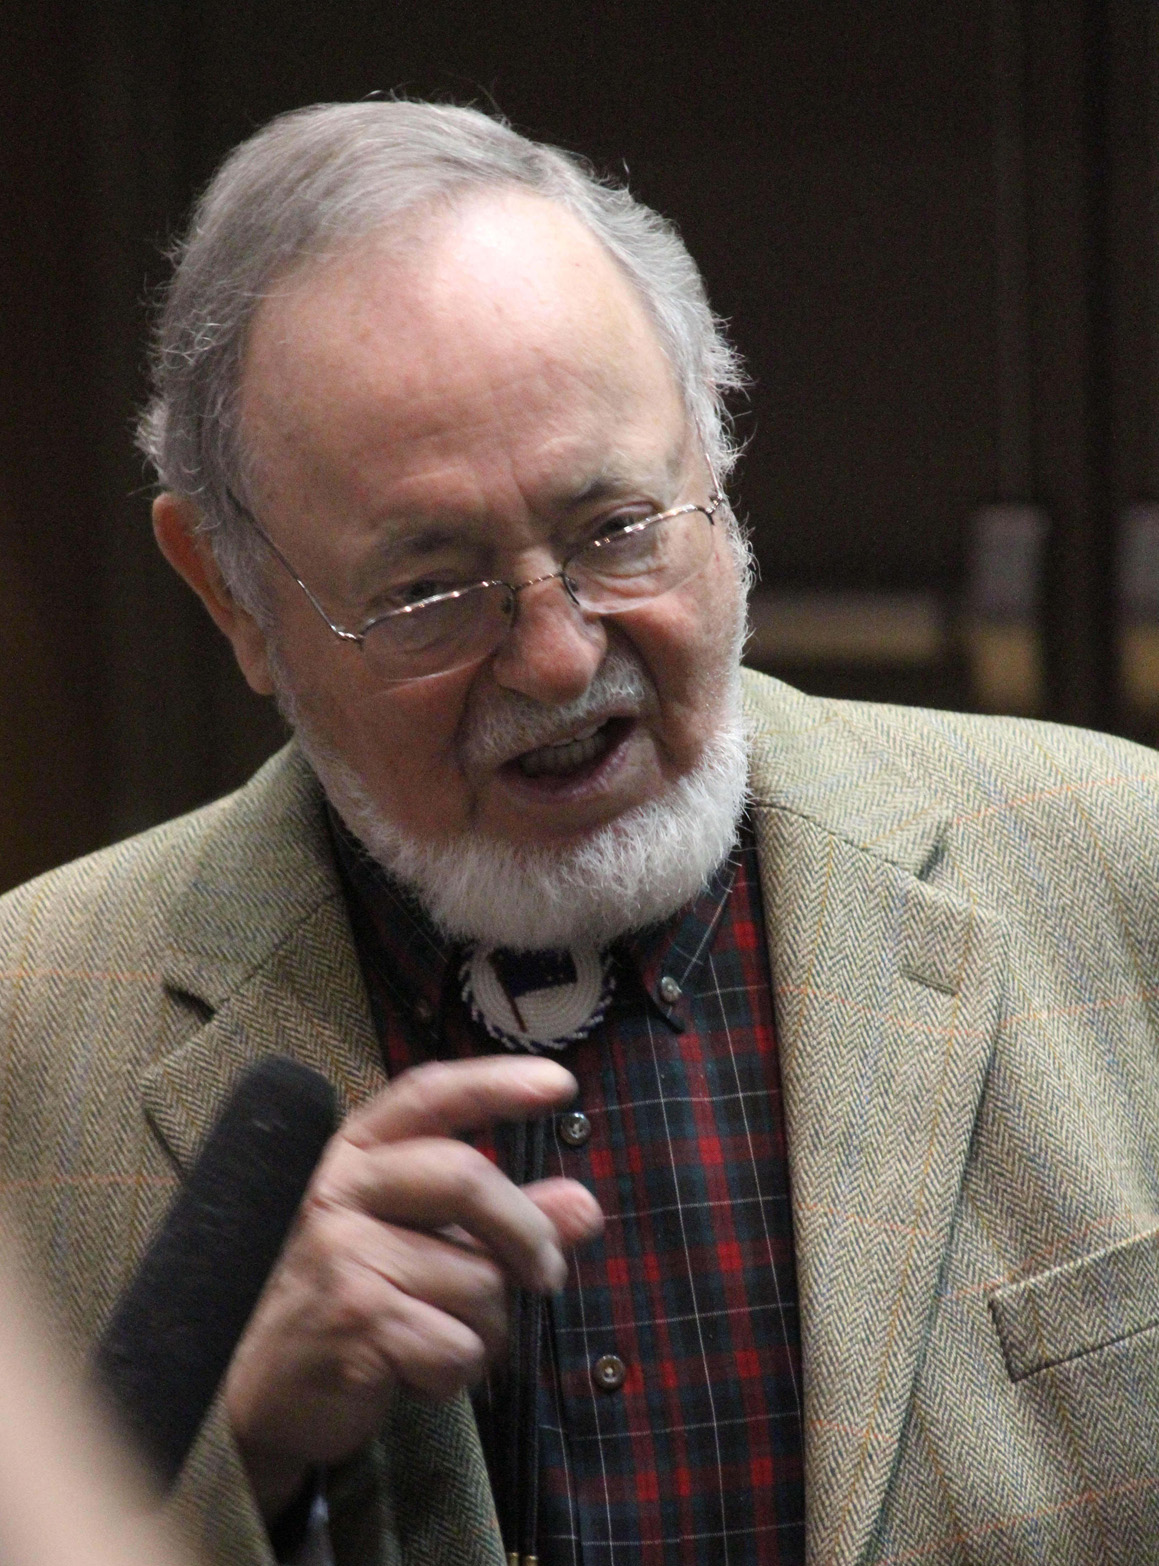 In this Oct. 16, 2015, file photo, Rep. Don Young, R-Alaska, speaks to reporters at the Alaska Federation of Natives conference in Anchorage.